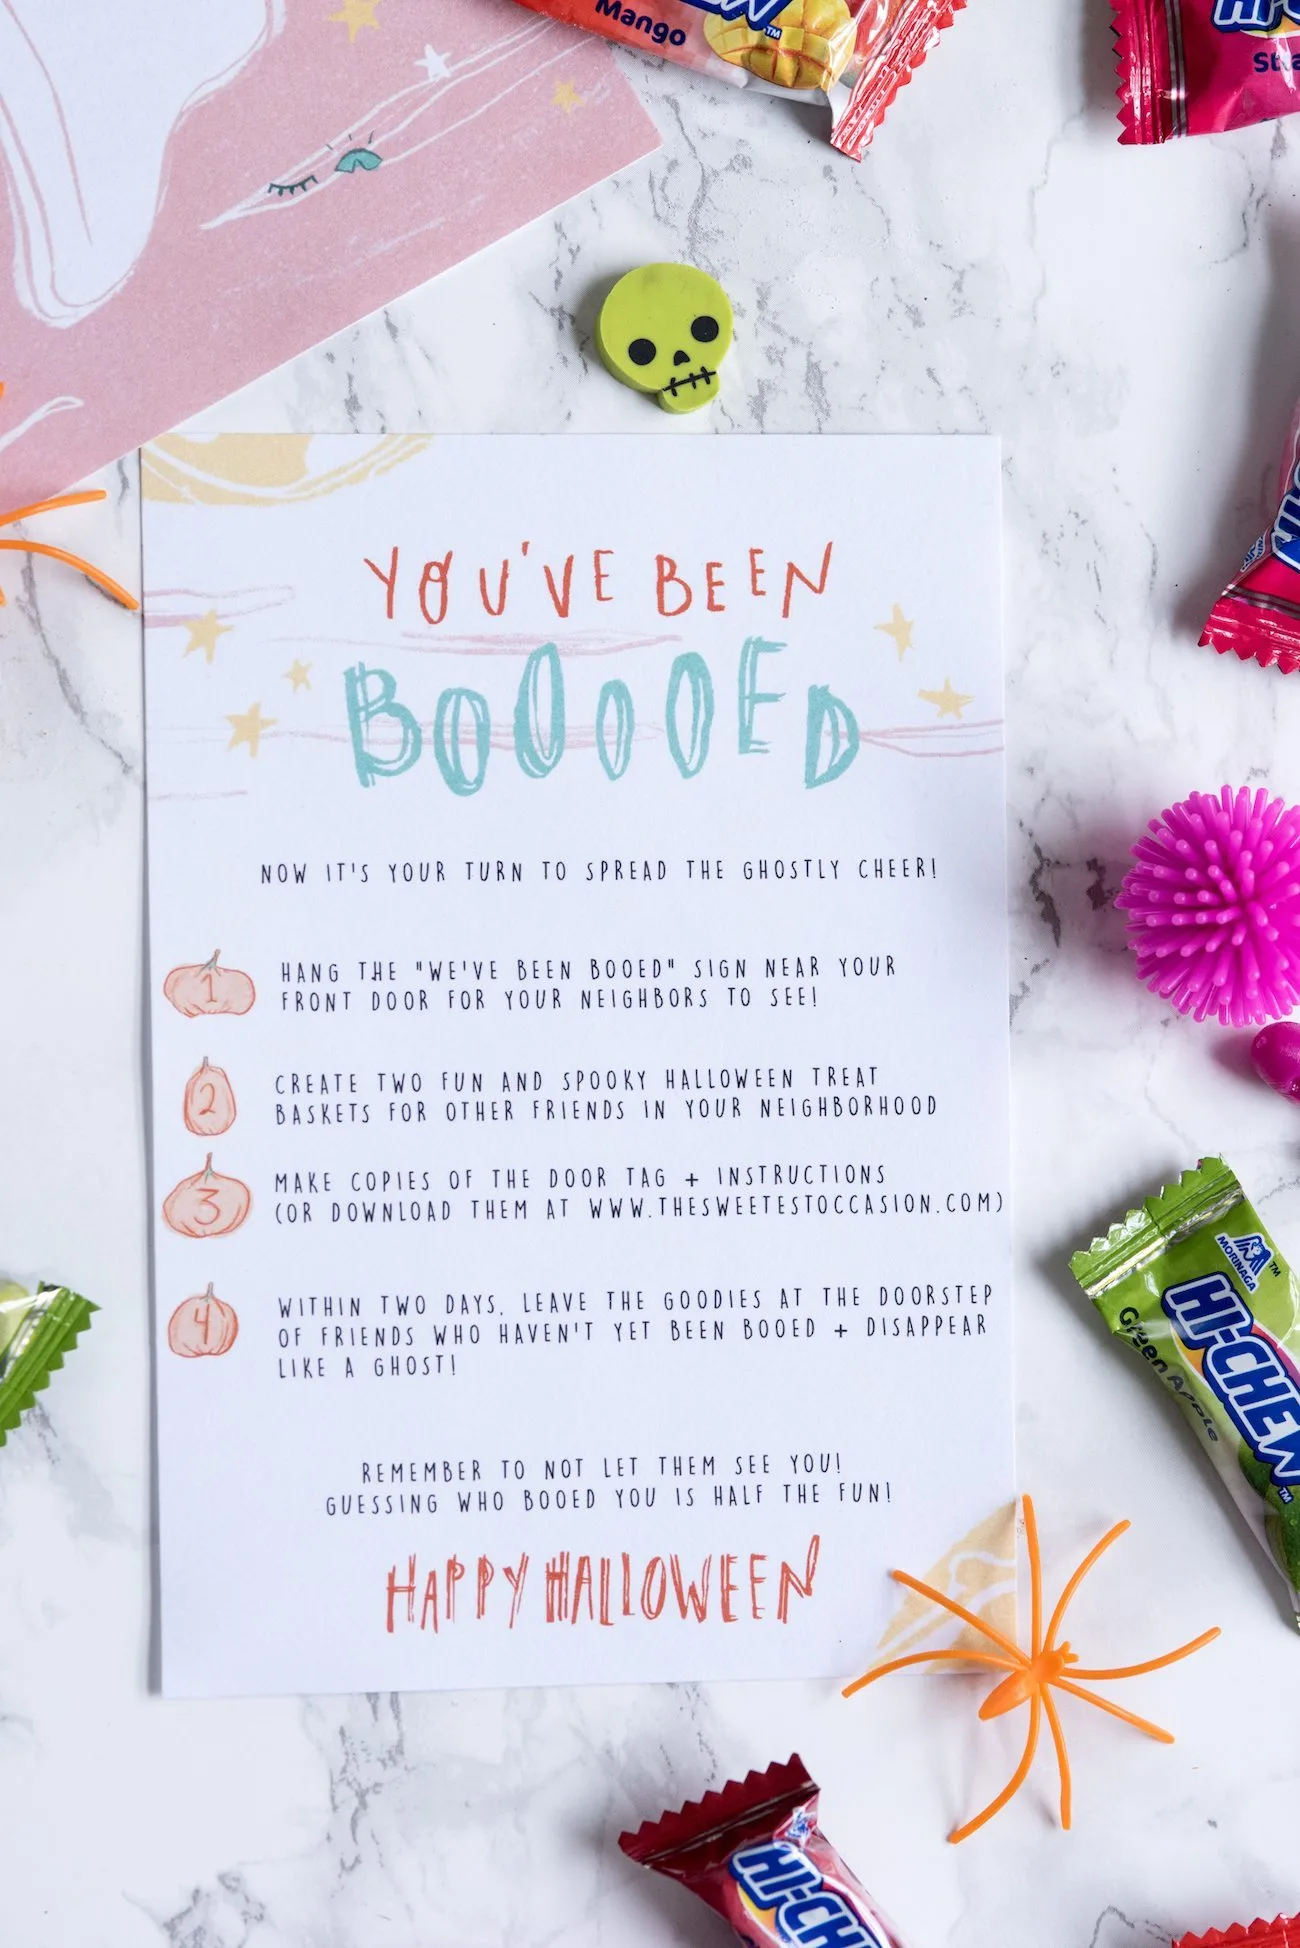 Trick or Treat! You've Been Booed Halloween Printables | Halloween ideas, Halloween party ideas, entertaining ideas, party recipes and more from @cydconverse